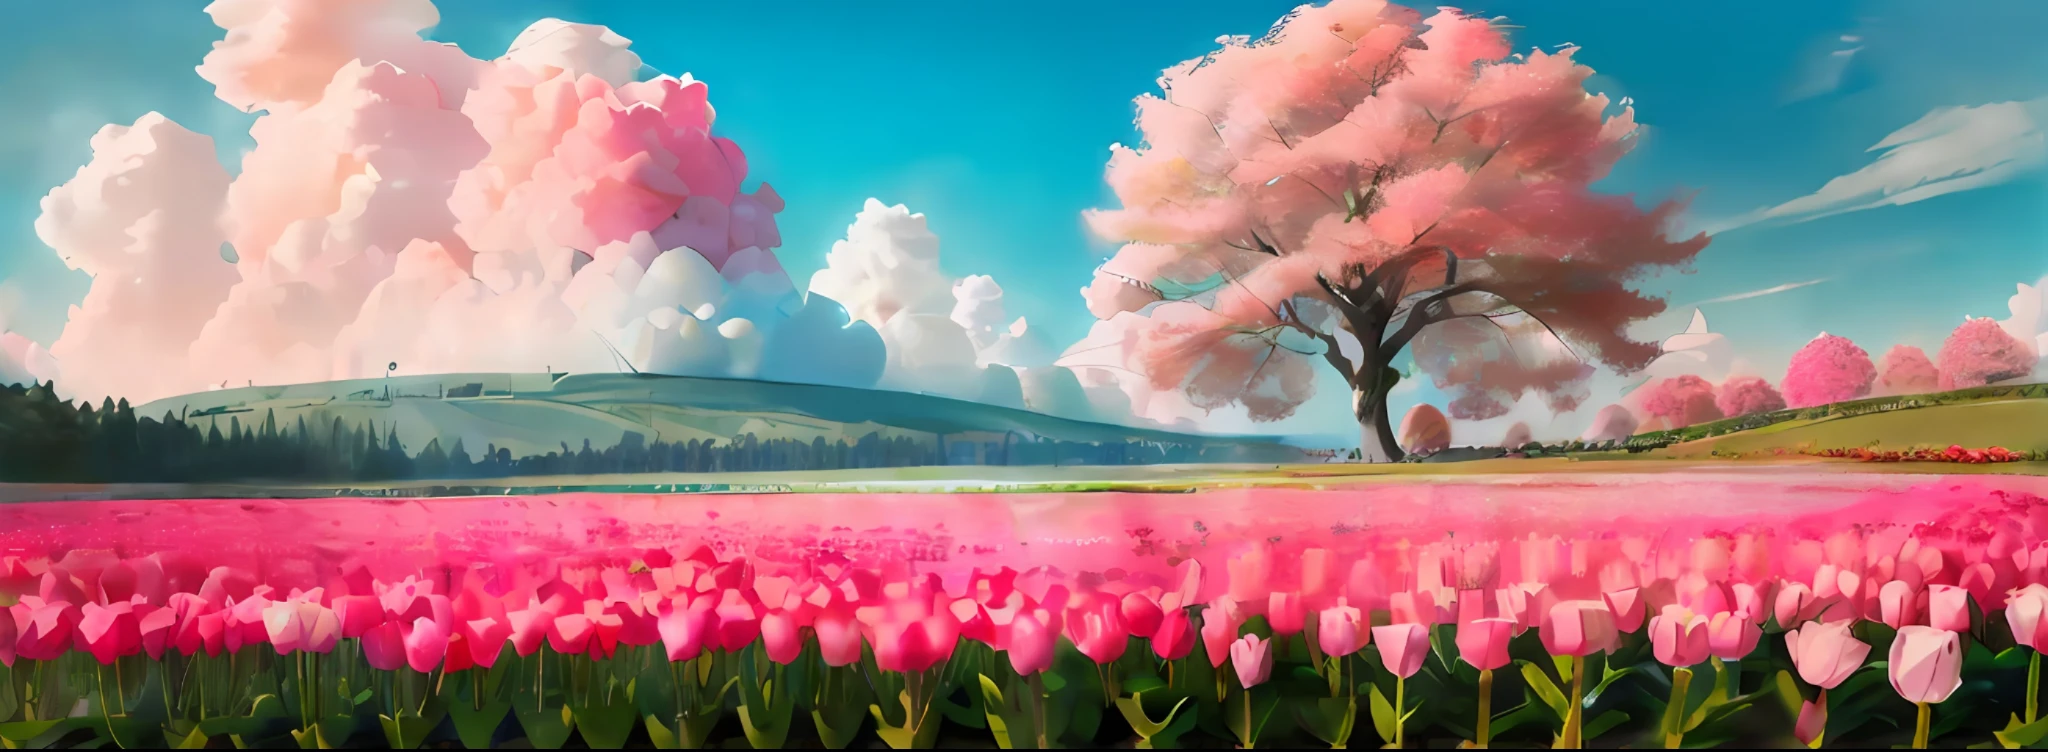 there is a painting of a field of pink tulips and a tree, a beautiful landscape, beautiful landscape, pink landscape, natural landscape beauty, beautiful landscape background, beautiful dreamy landscape, field of pink flowers, background artwork, beautiful scenic landscape, nature landscape, natural landscape, dreamy landscape, beautiful art uhd 4 k, very beautiful photo, beautiful serene landscape, fantastic landscape